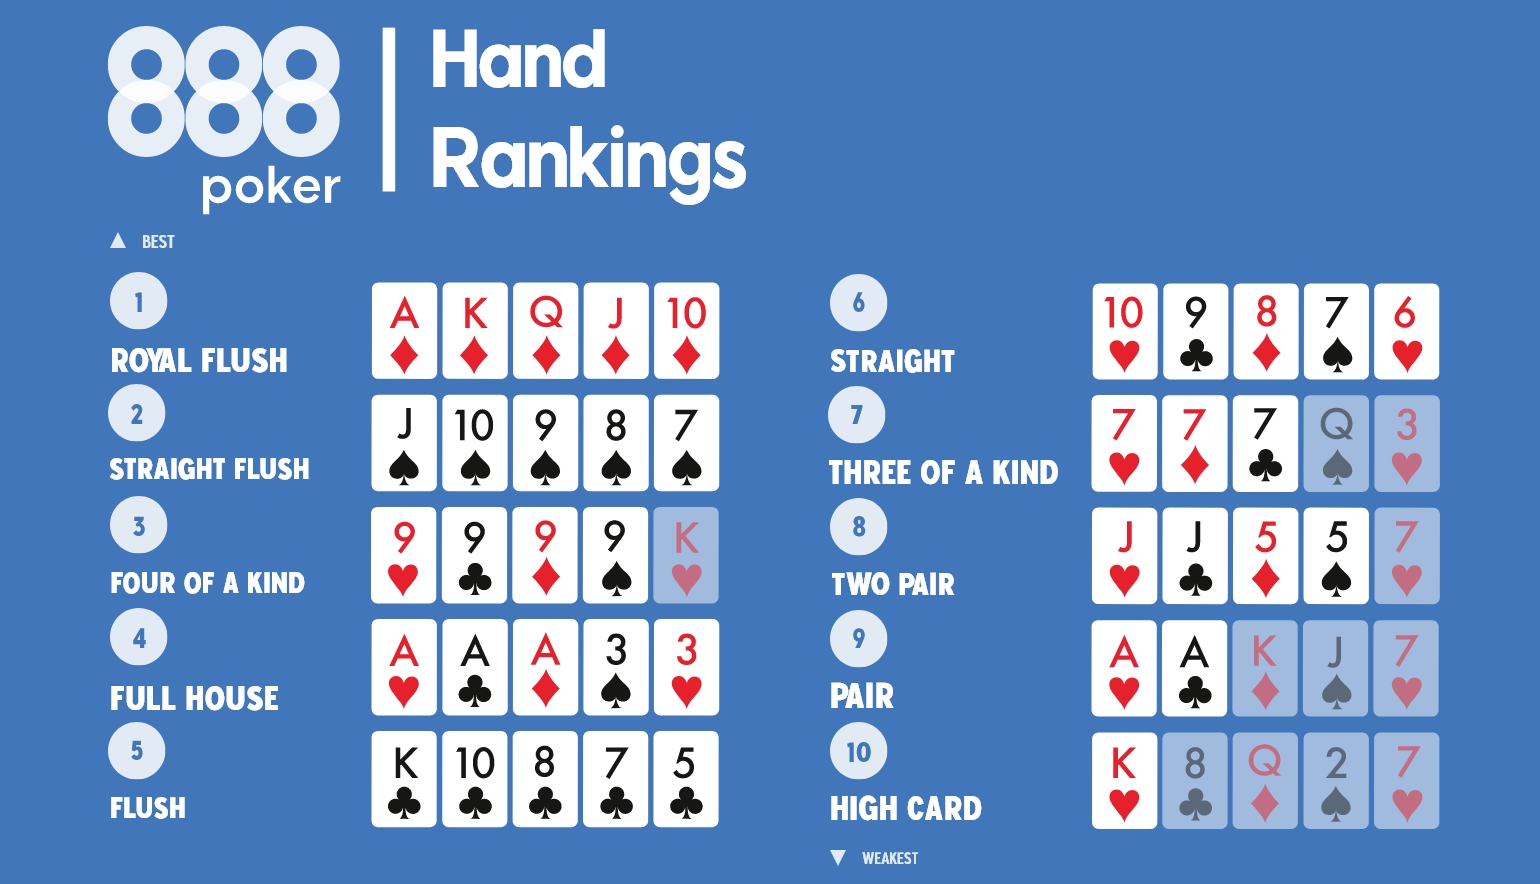 What are the different poker hand rankings?